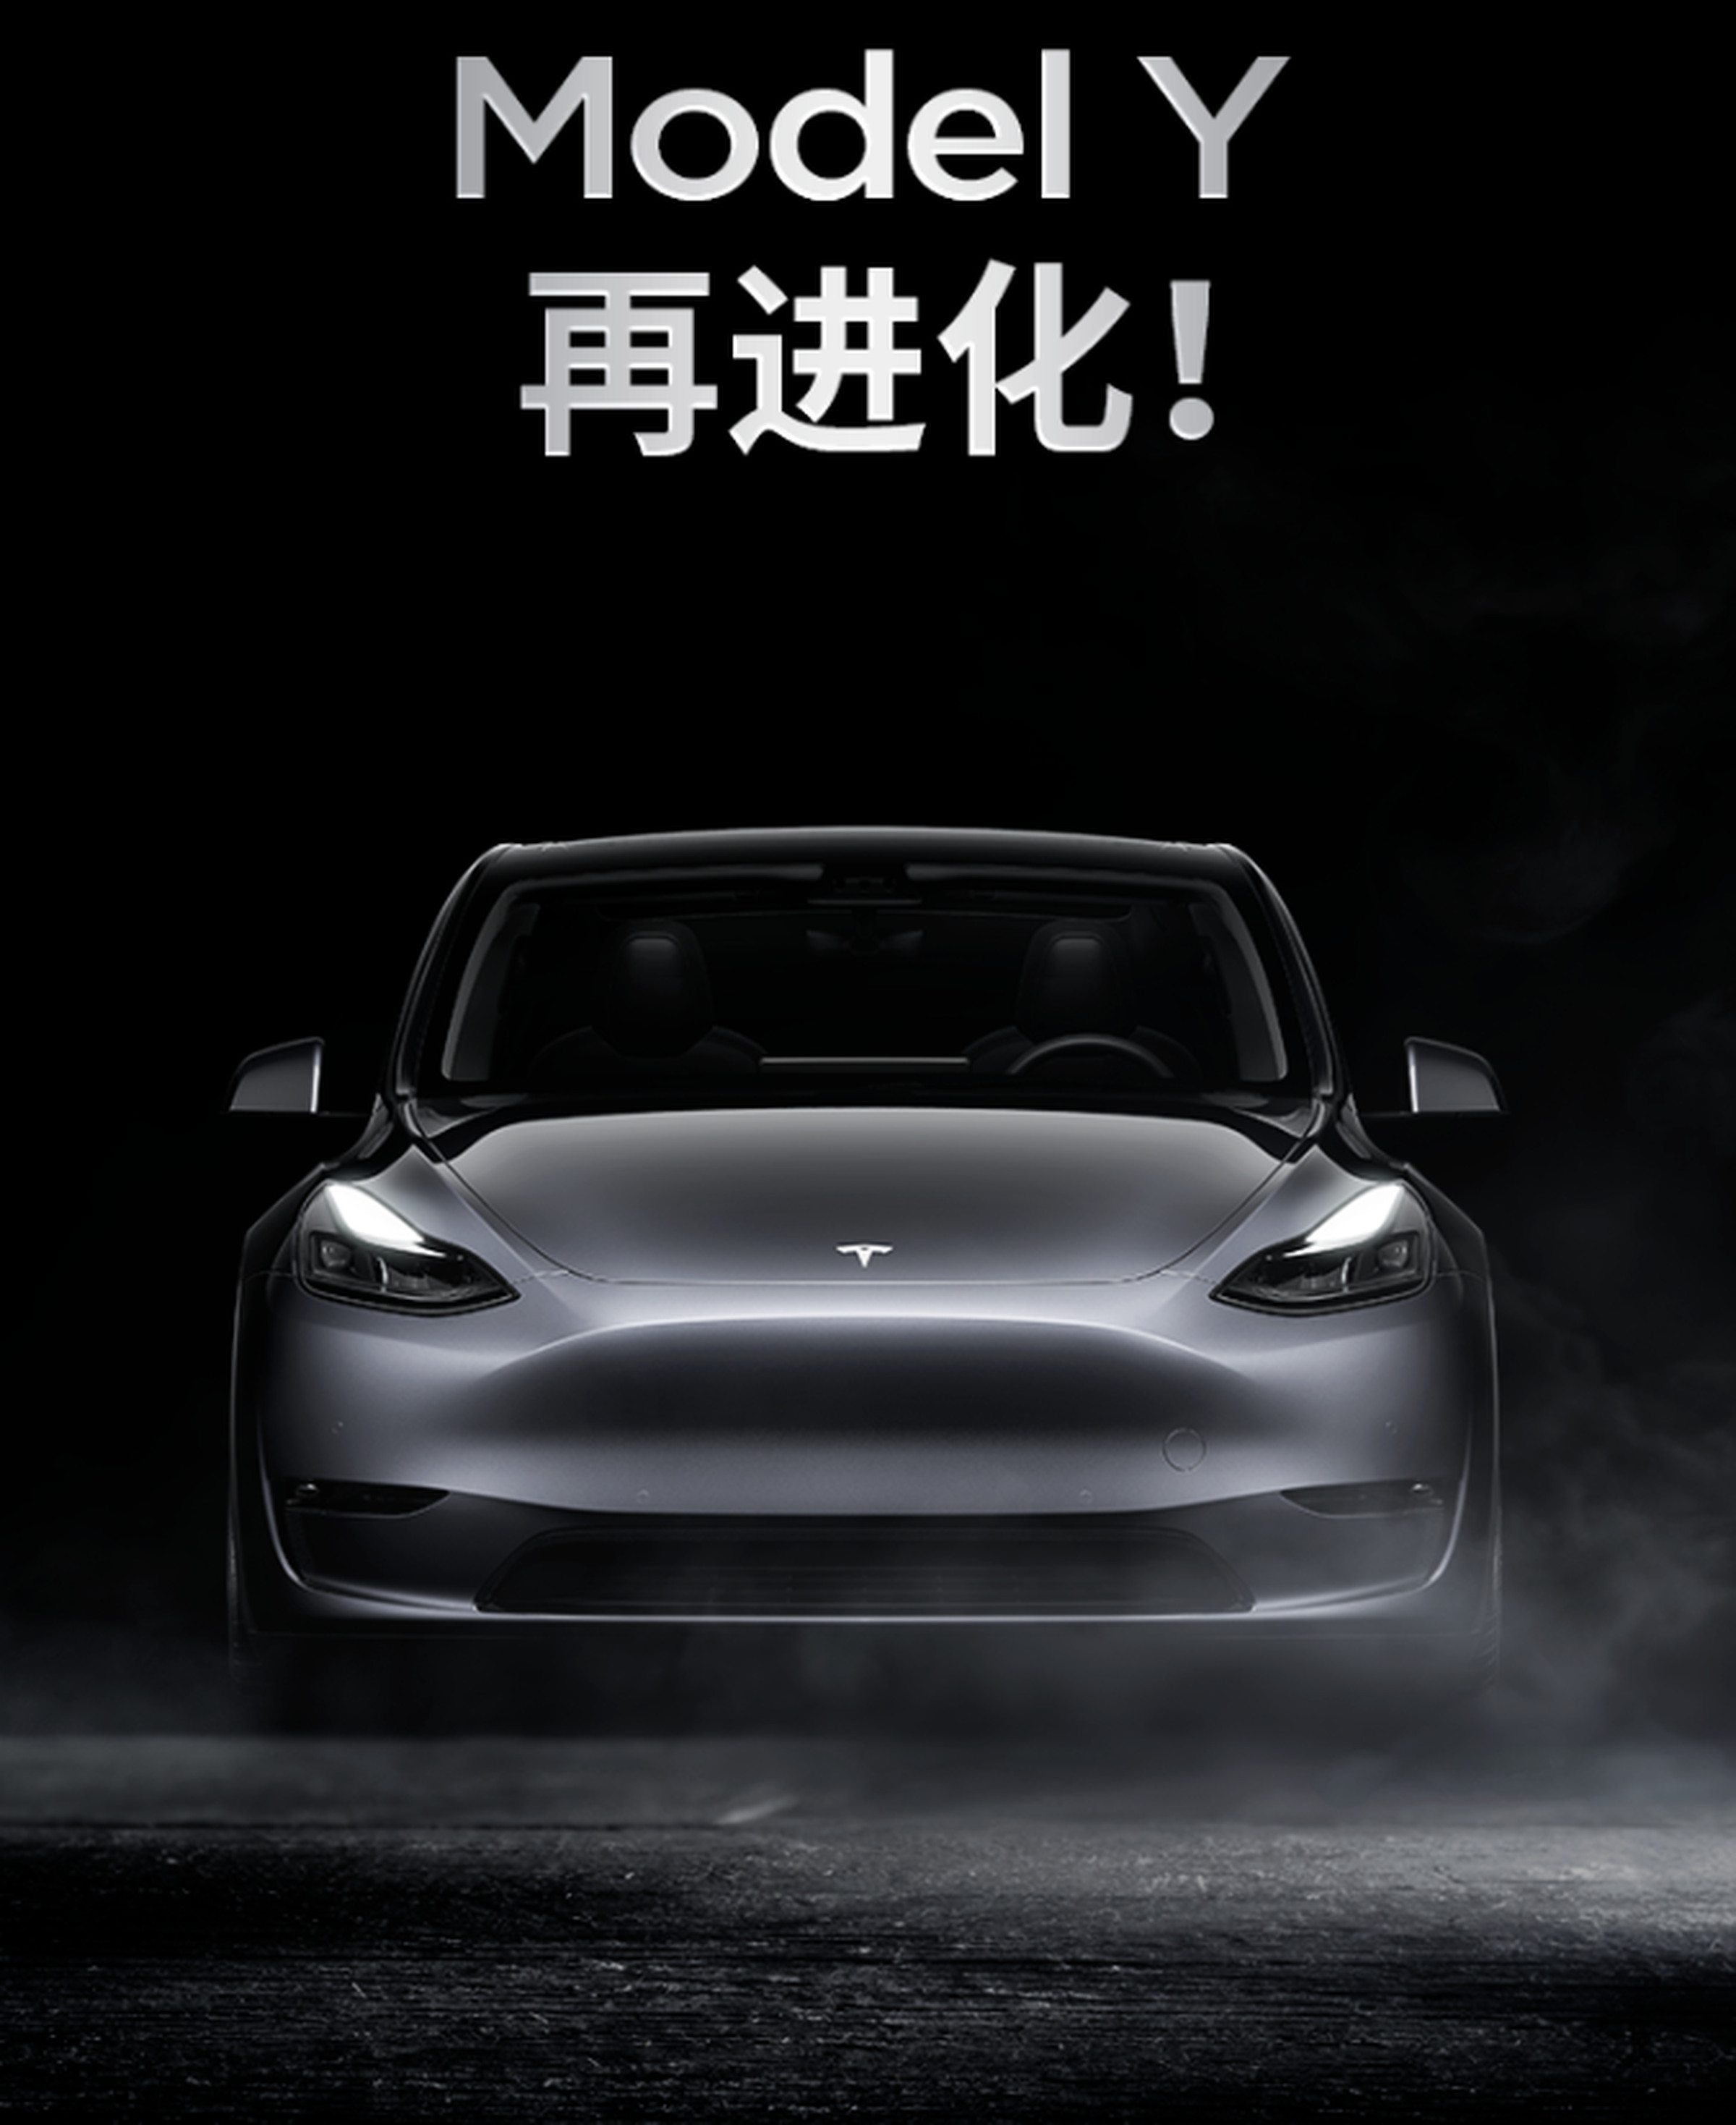 A picture of the front of the new Tesla Model Y in China.